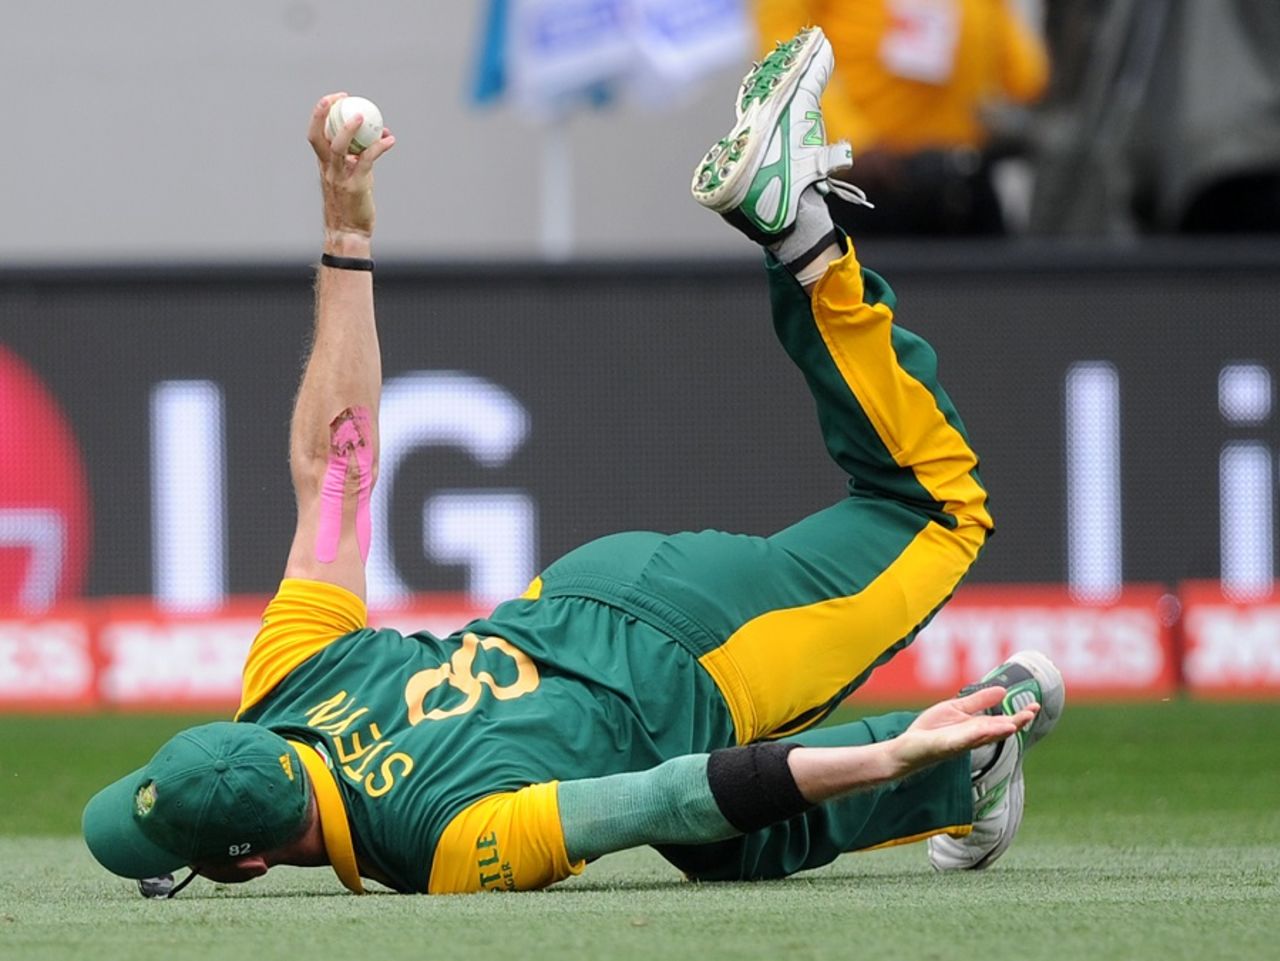 Dale Steyn holds the ball up after taking a marvellous catch, Pakistan v South Africa, World Cup 2015, Group B, Auckland, March 7, 2015